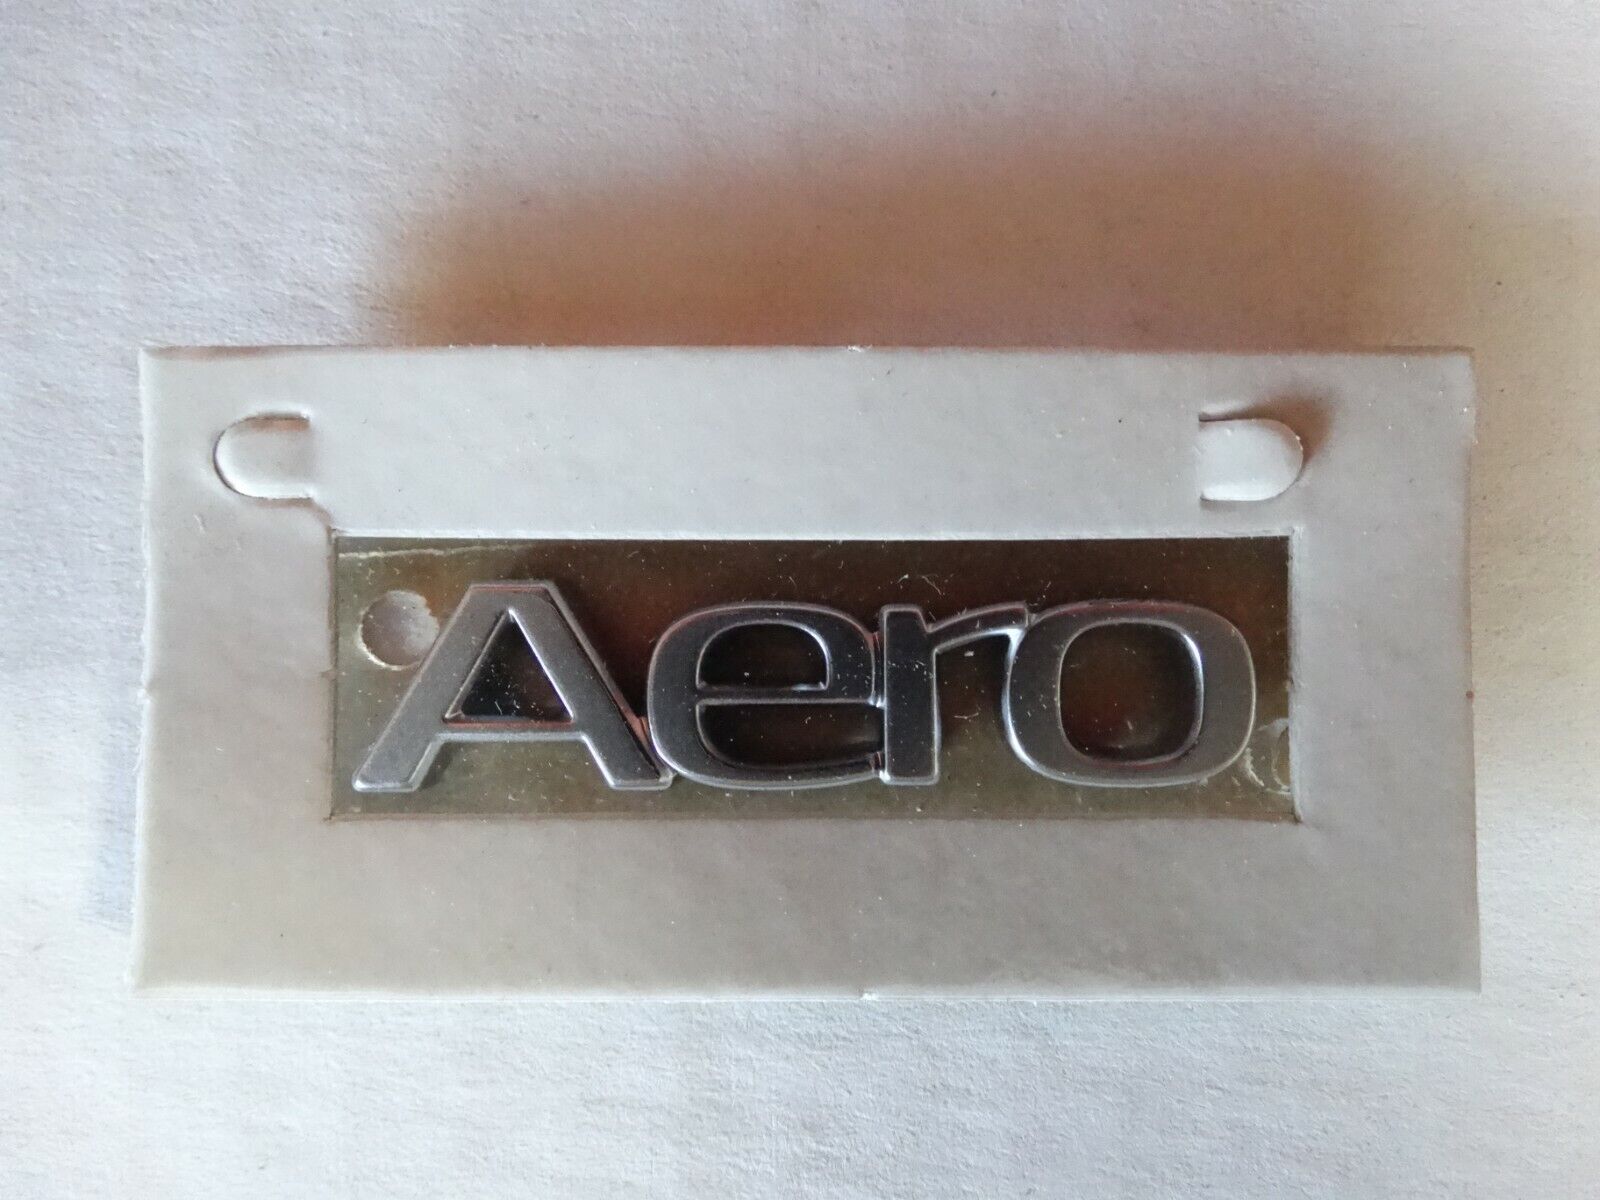 SAAB Emblem AERO Emblem NEW OEM Size is 2 inches long 3/8 is the height 